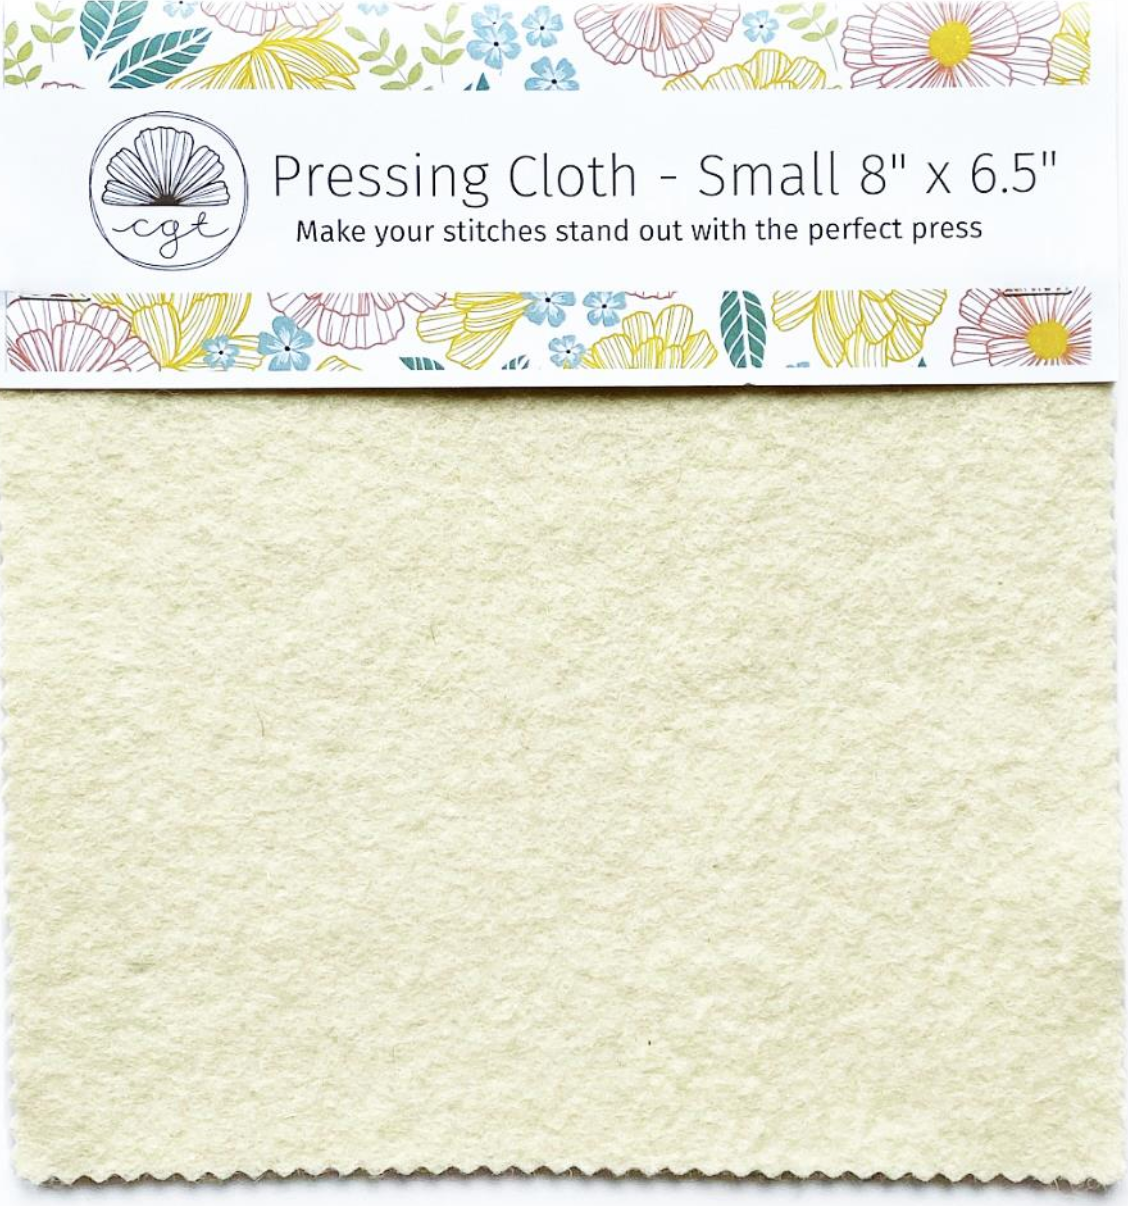 Embroidery Pressing Cloth by Cottage Garden Threads